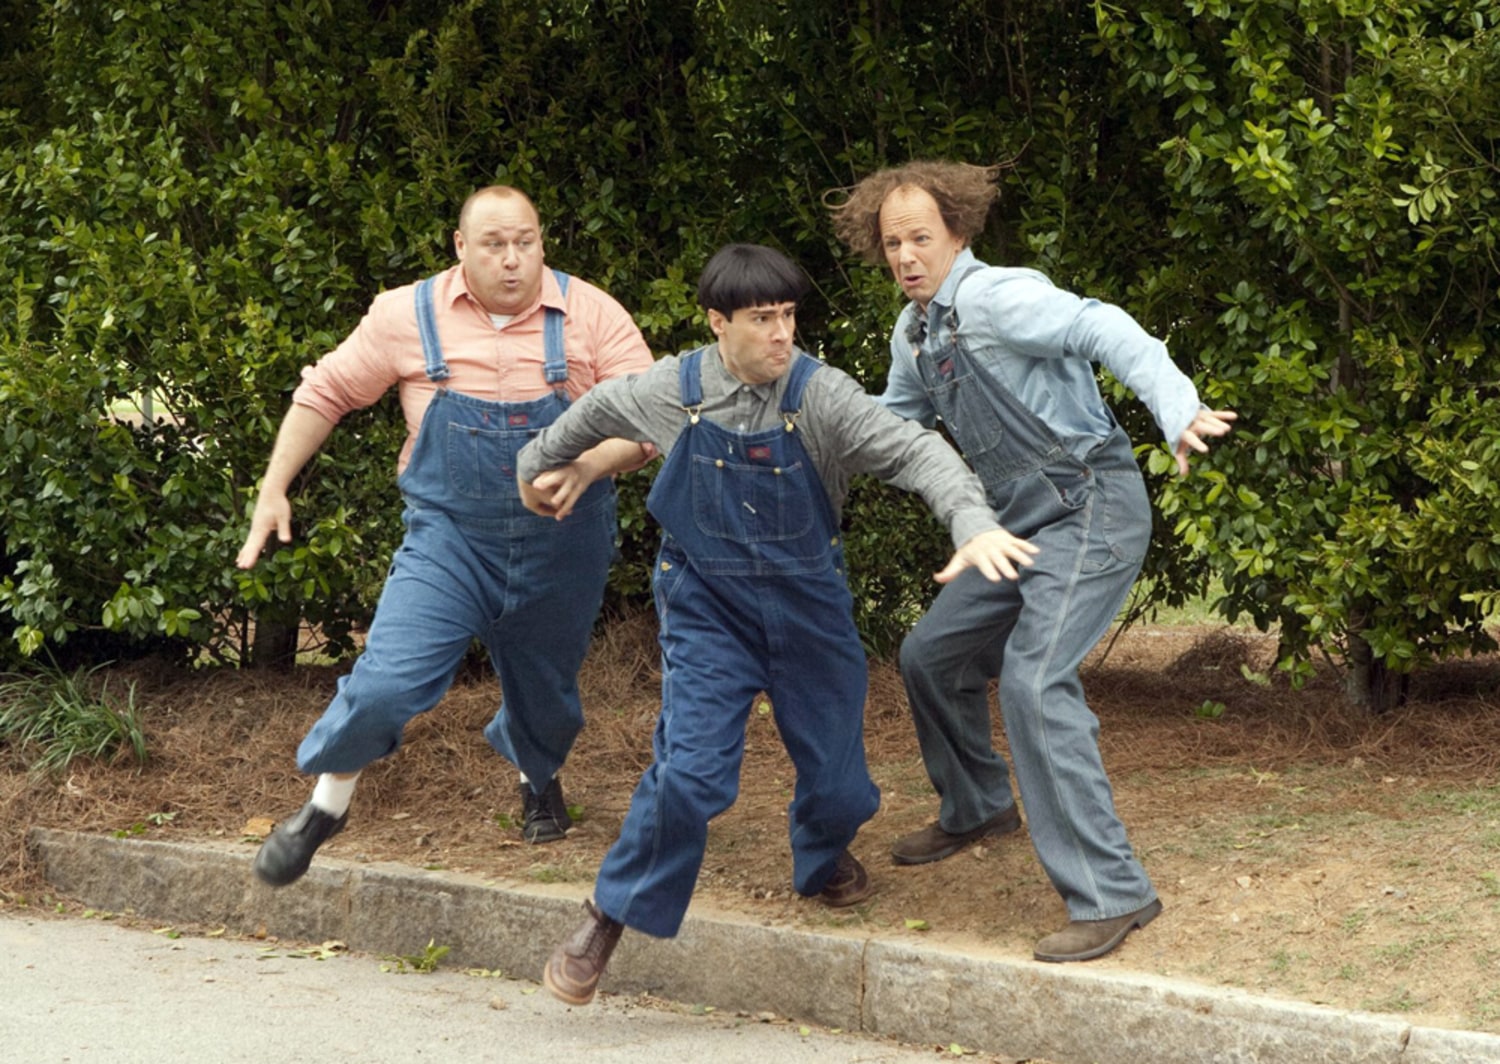 Three Stooges' slaps delightful new life into classic trio of bumblers